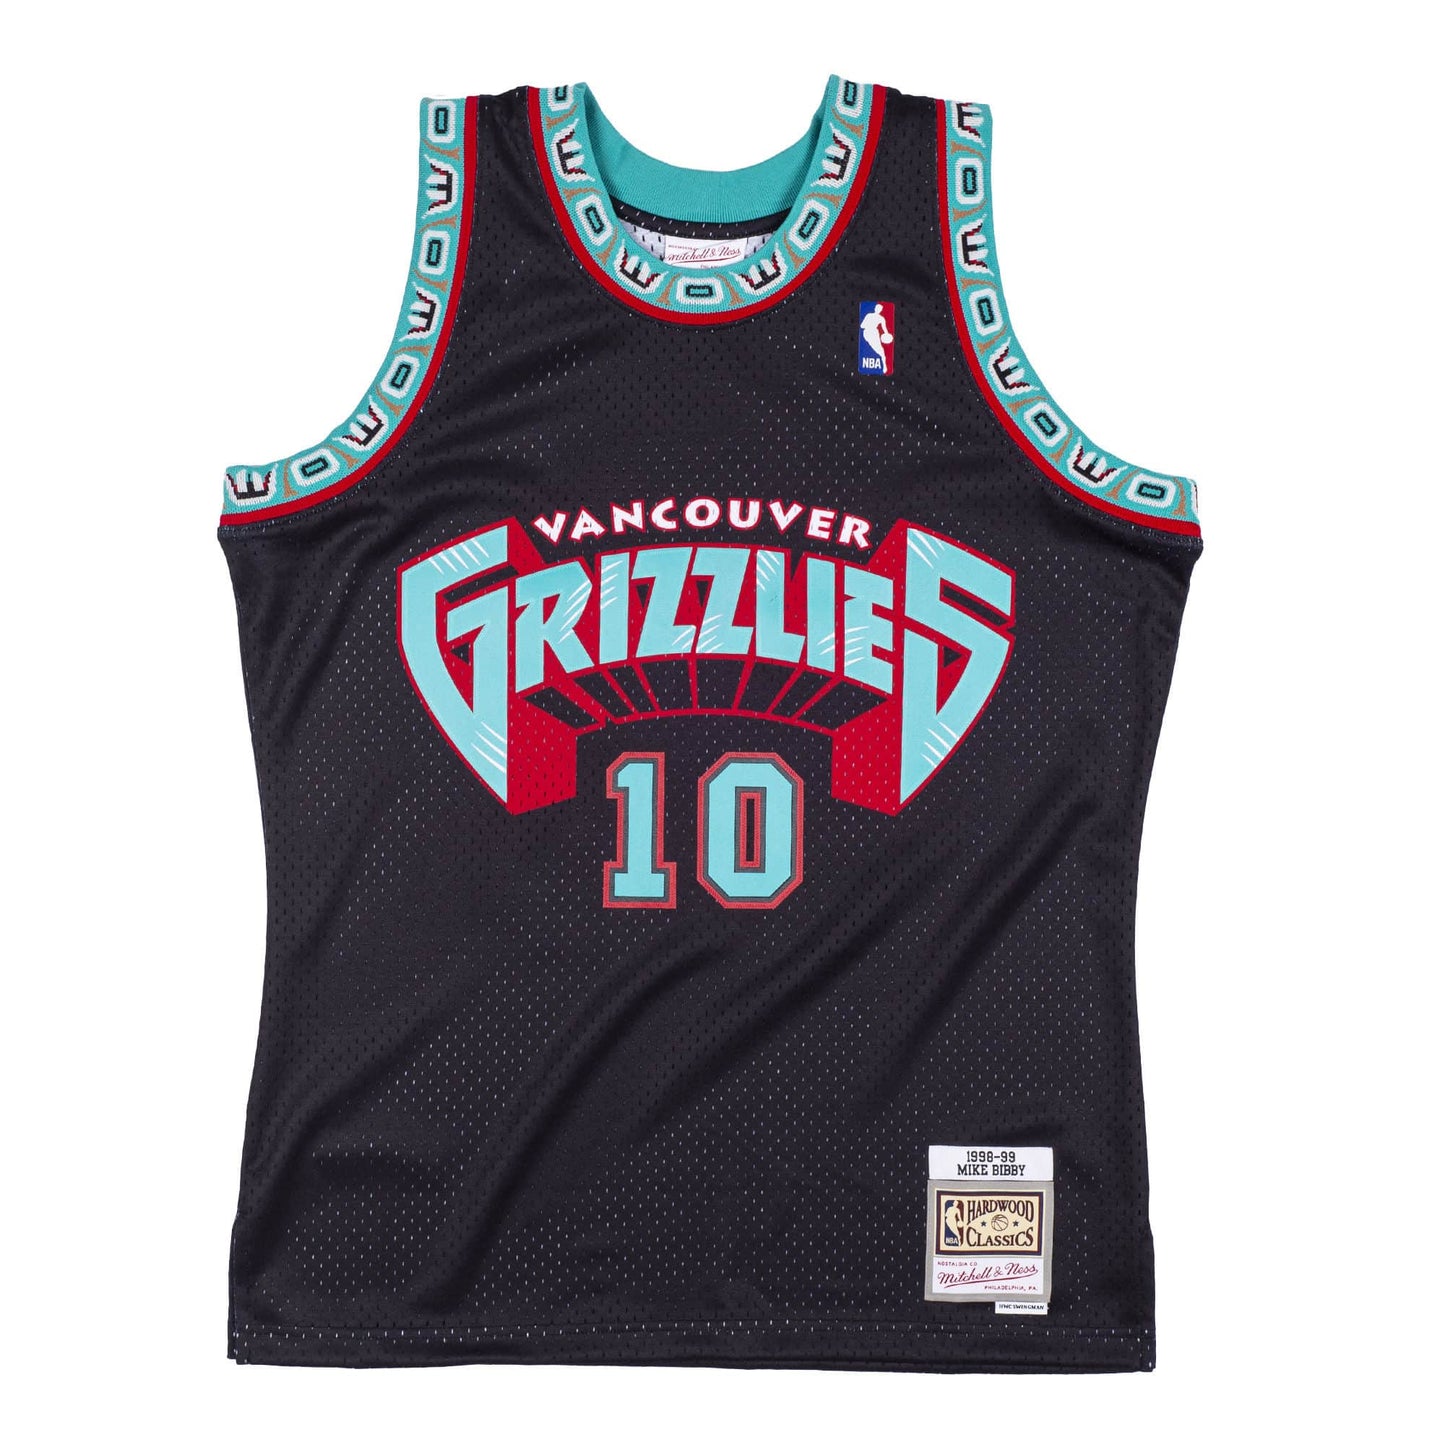 Vancouver Grizzlies Mike Bibby Mitchell and Ness Jersey - Reload (1998-99)